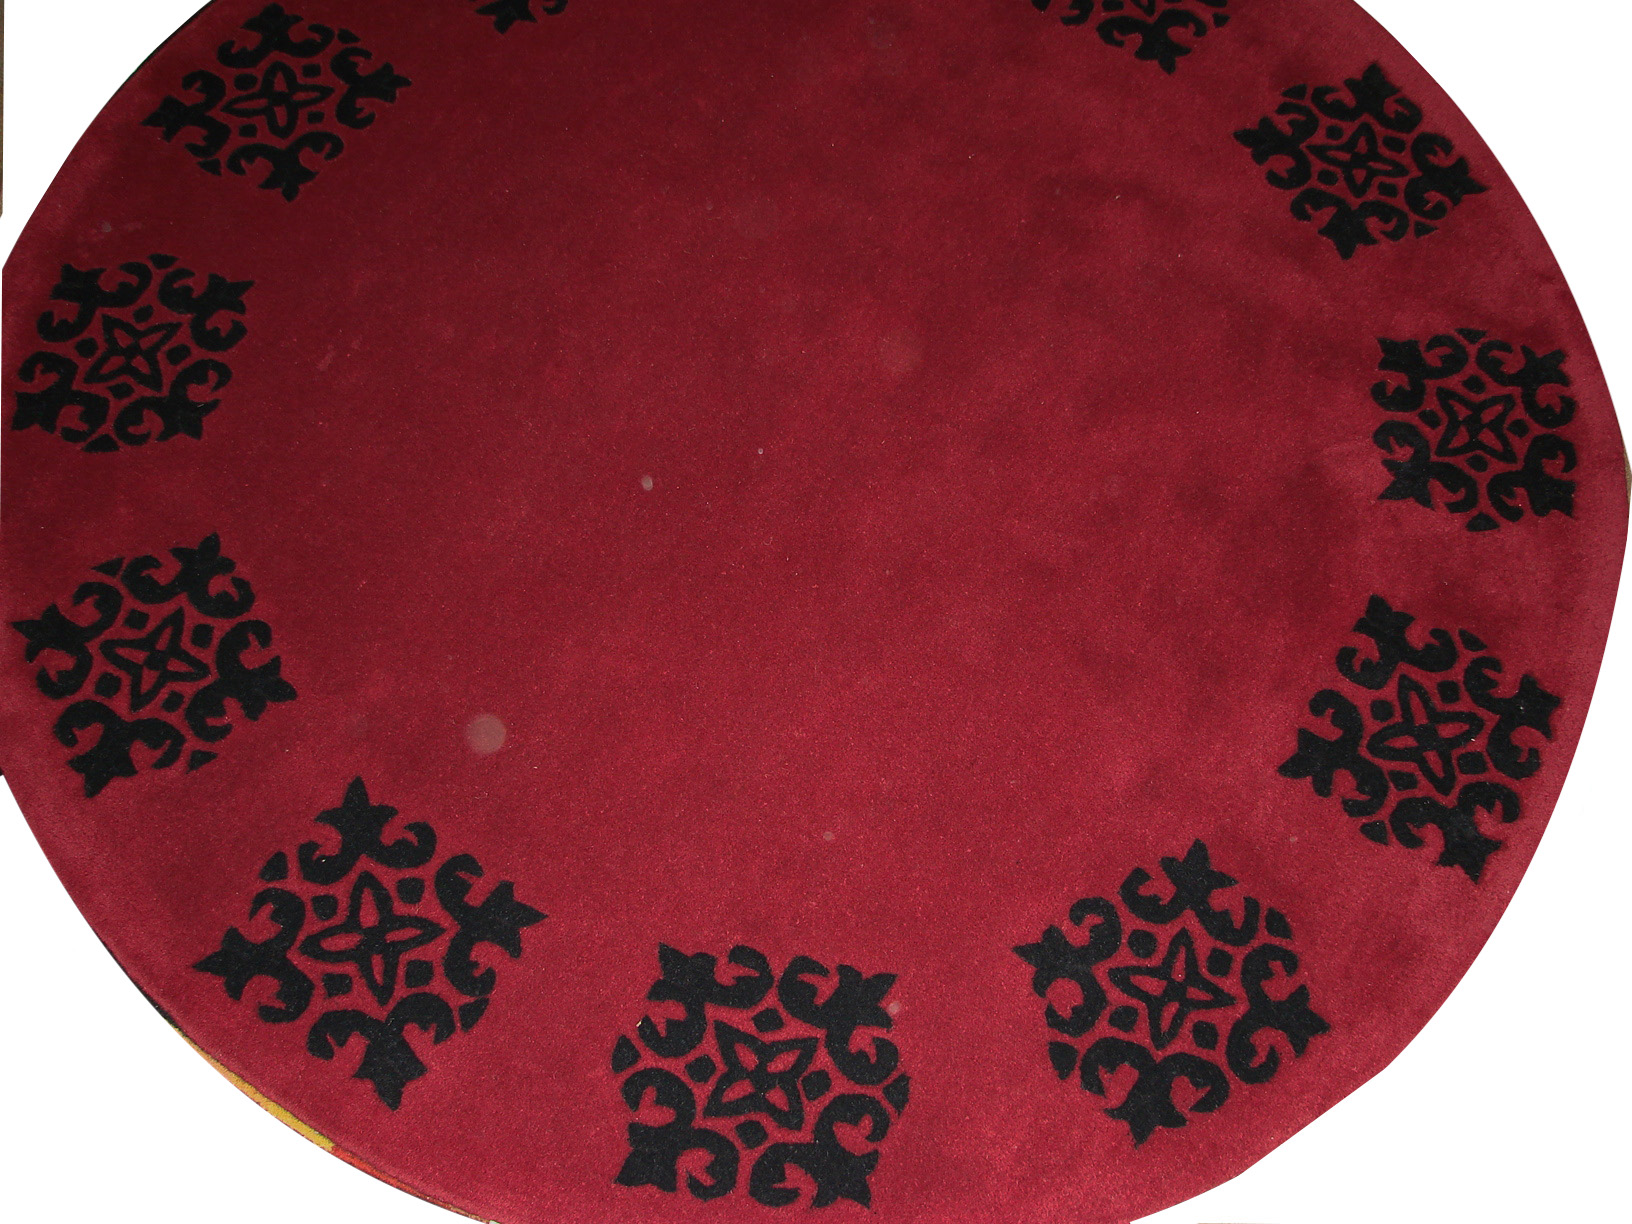 ROSE BLACK ROUND RUGS with SPECIAL OFFER DOT 